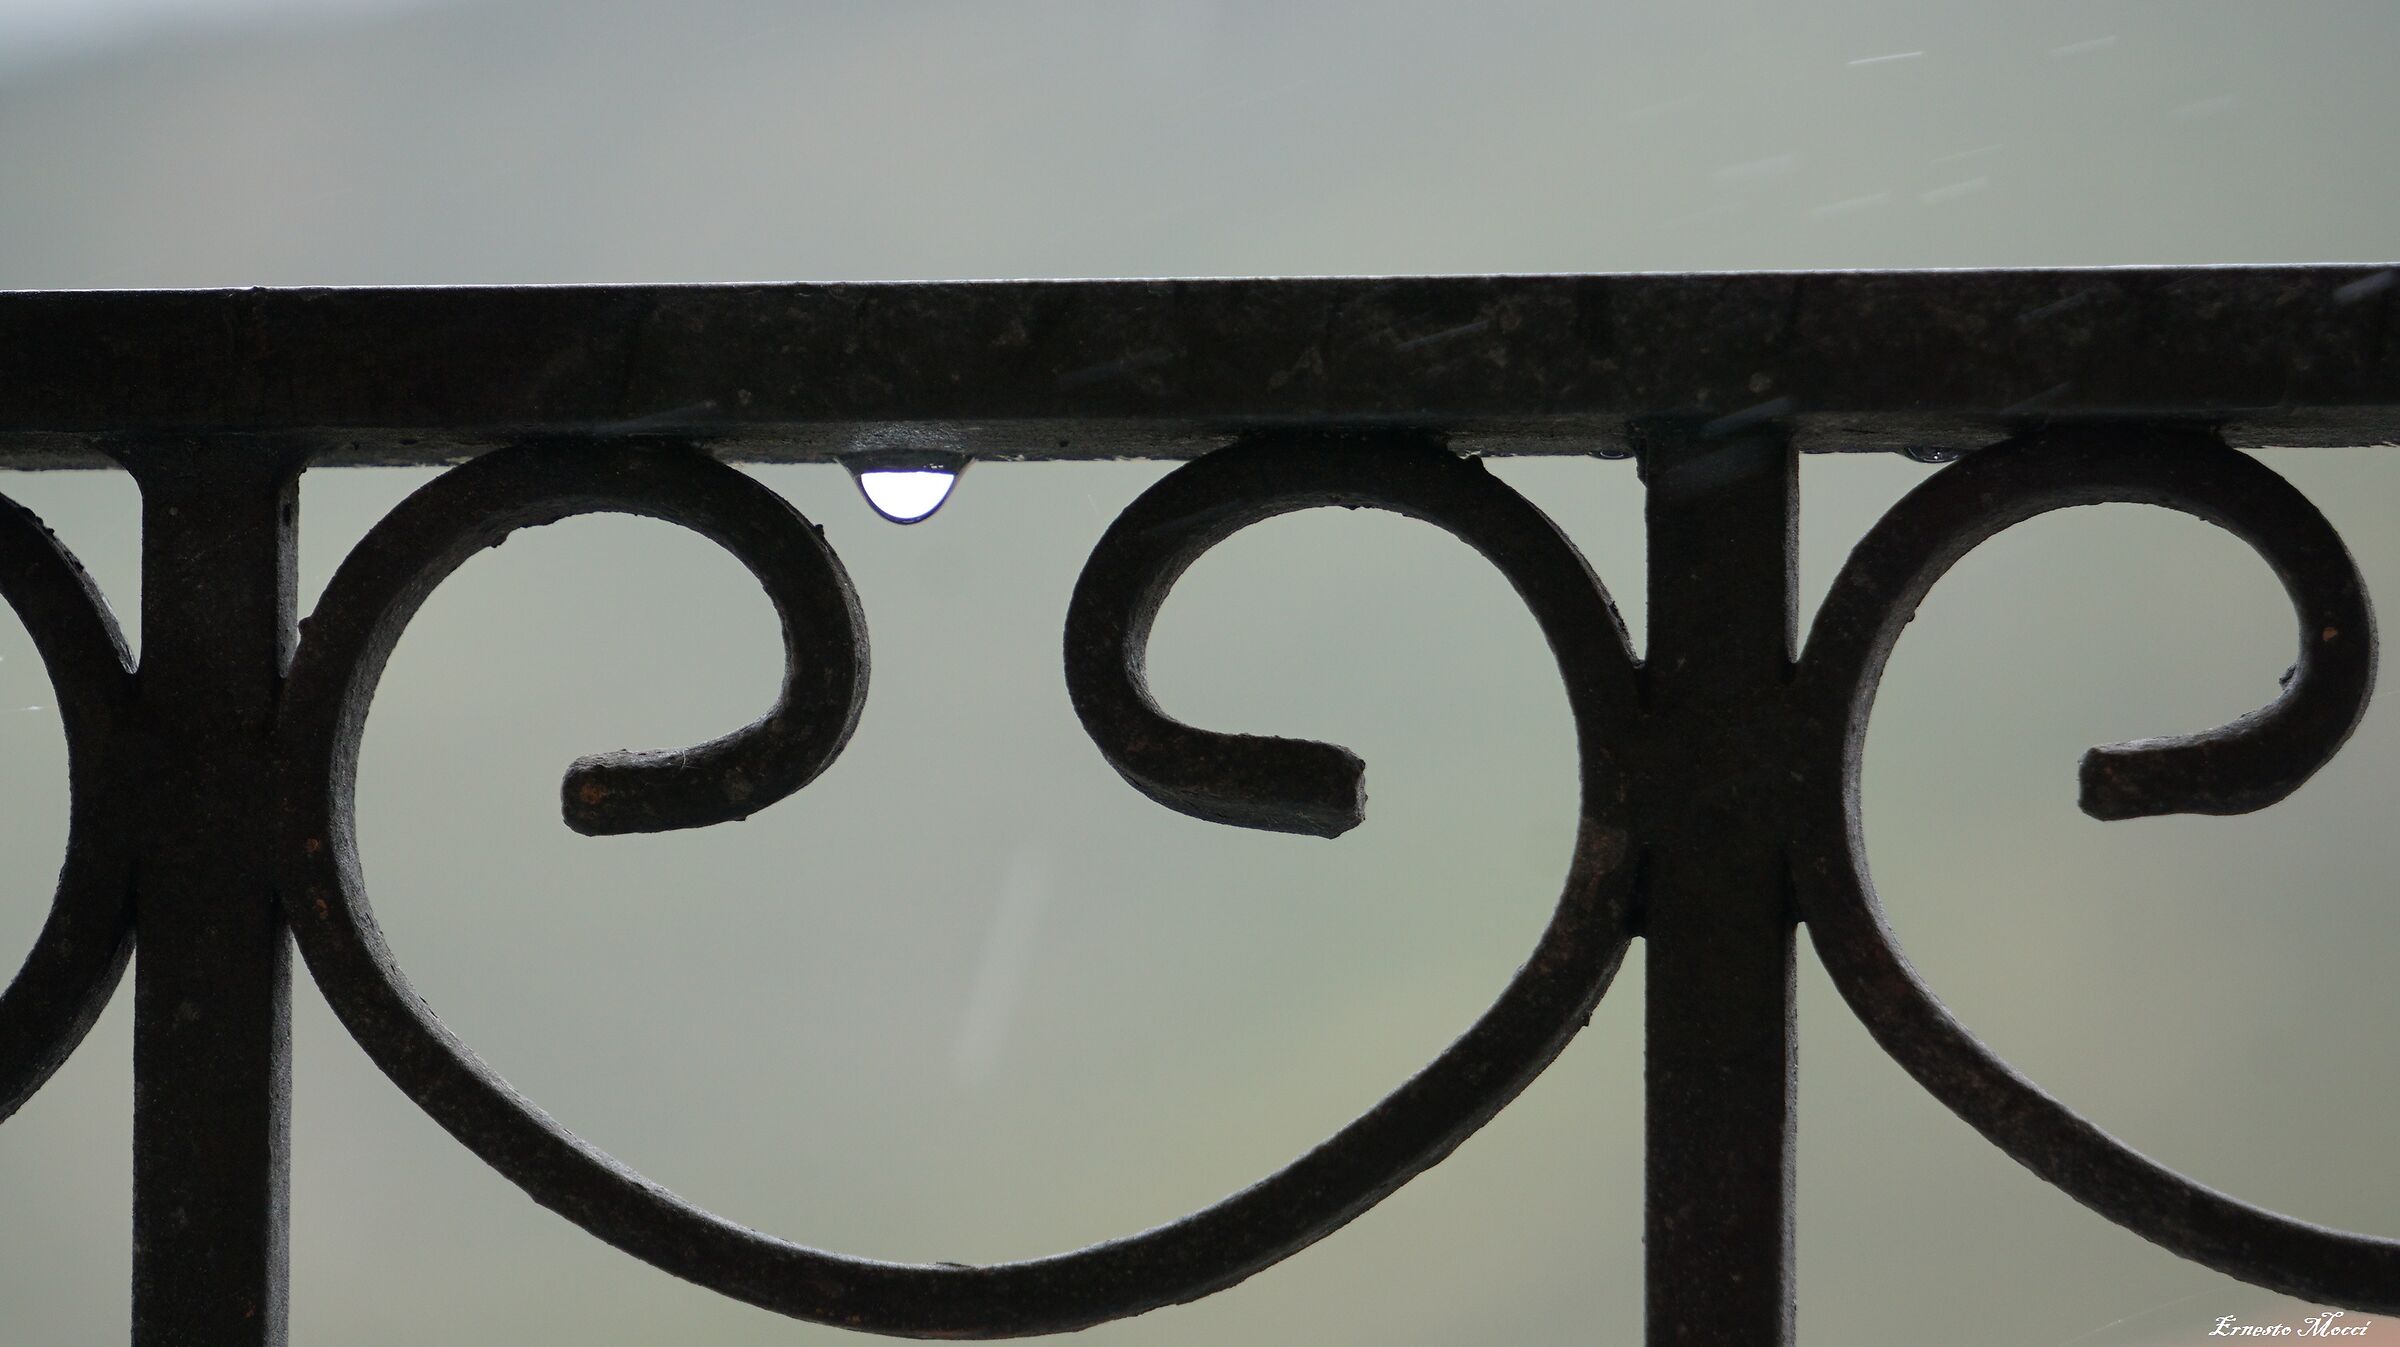 Bad weather-even the iron has a heart of light...